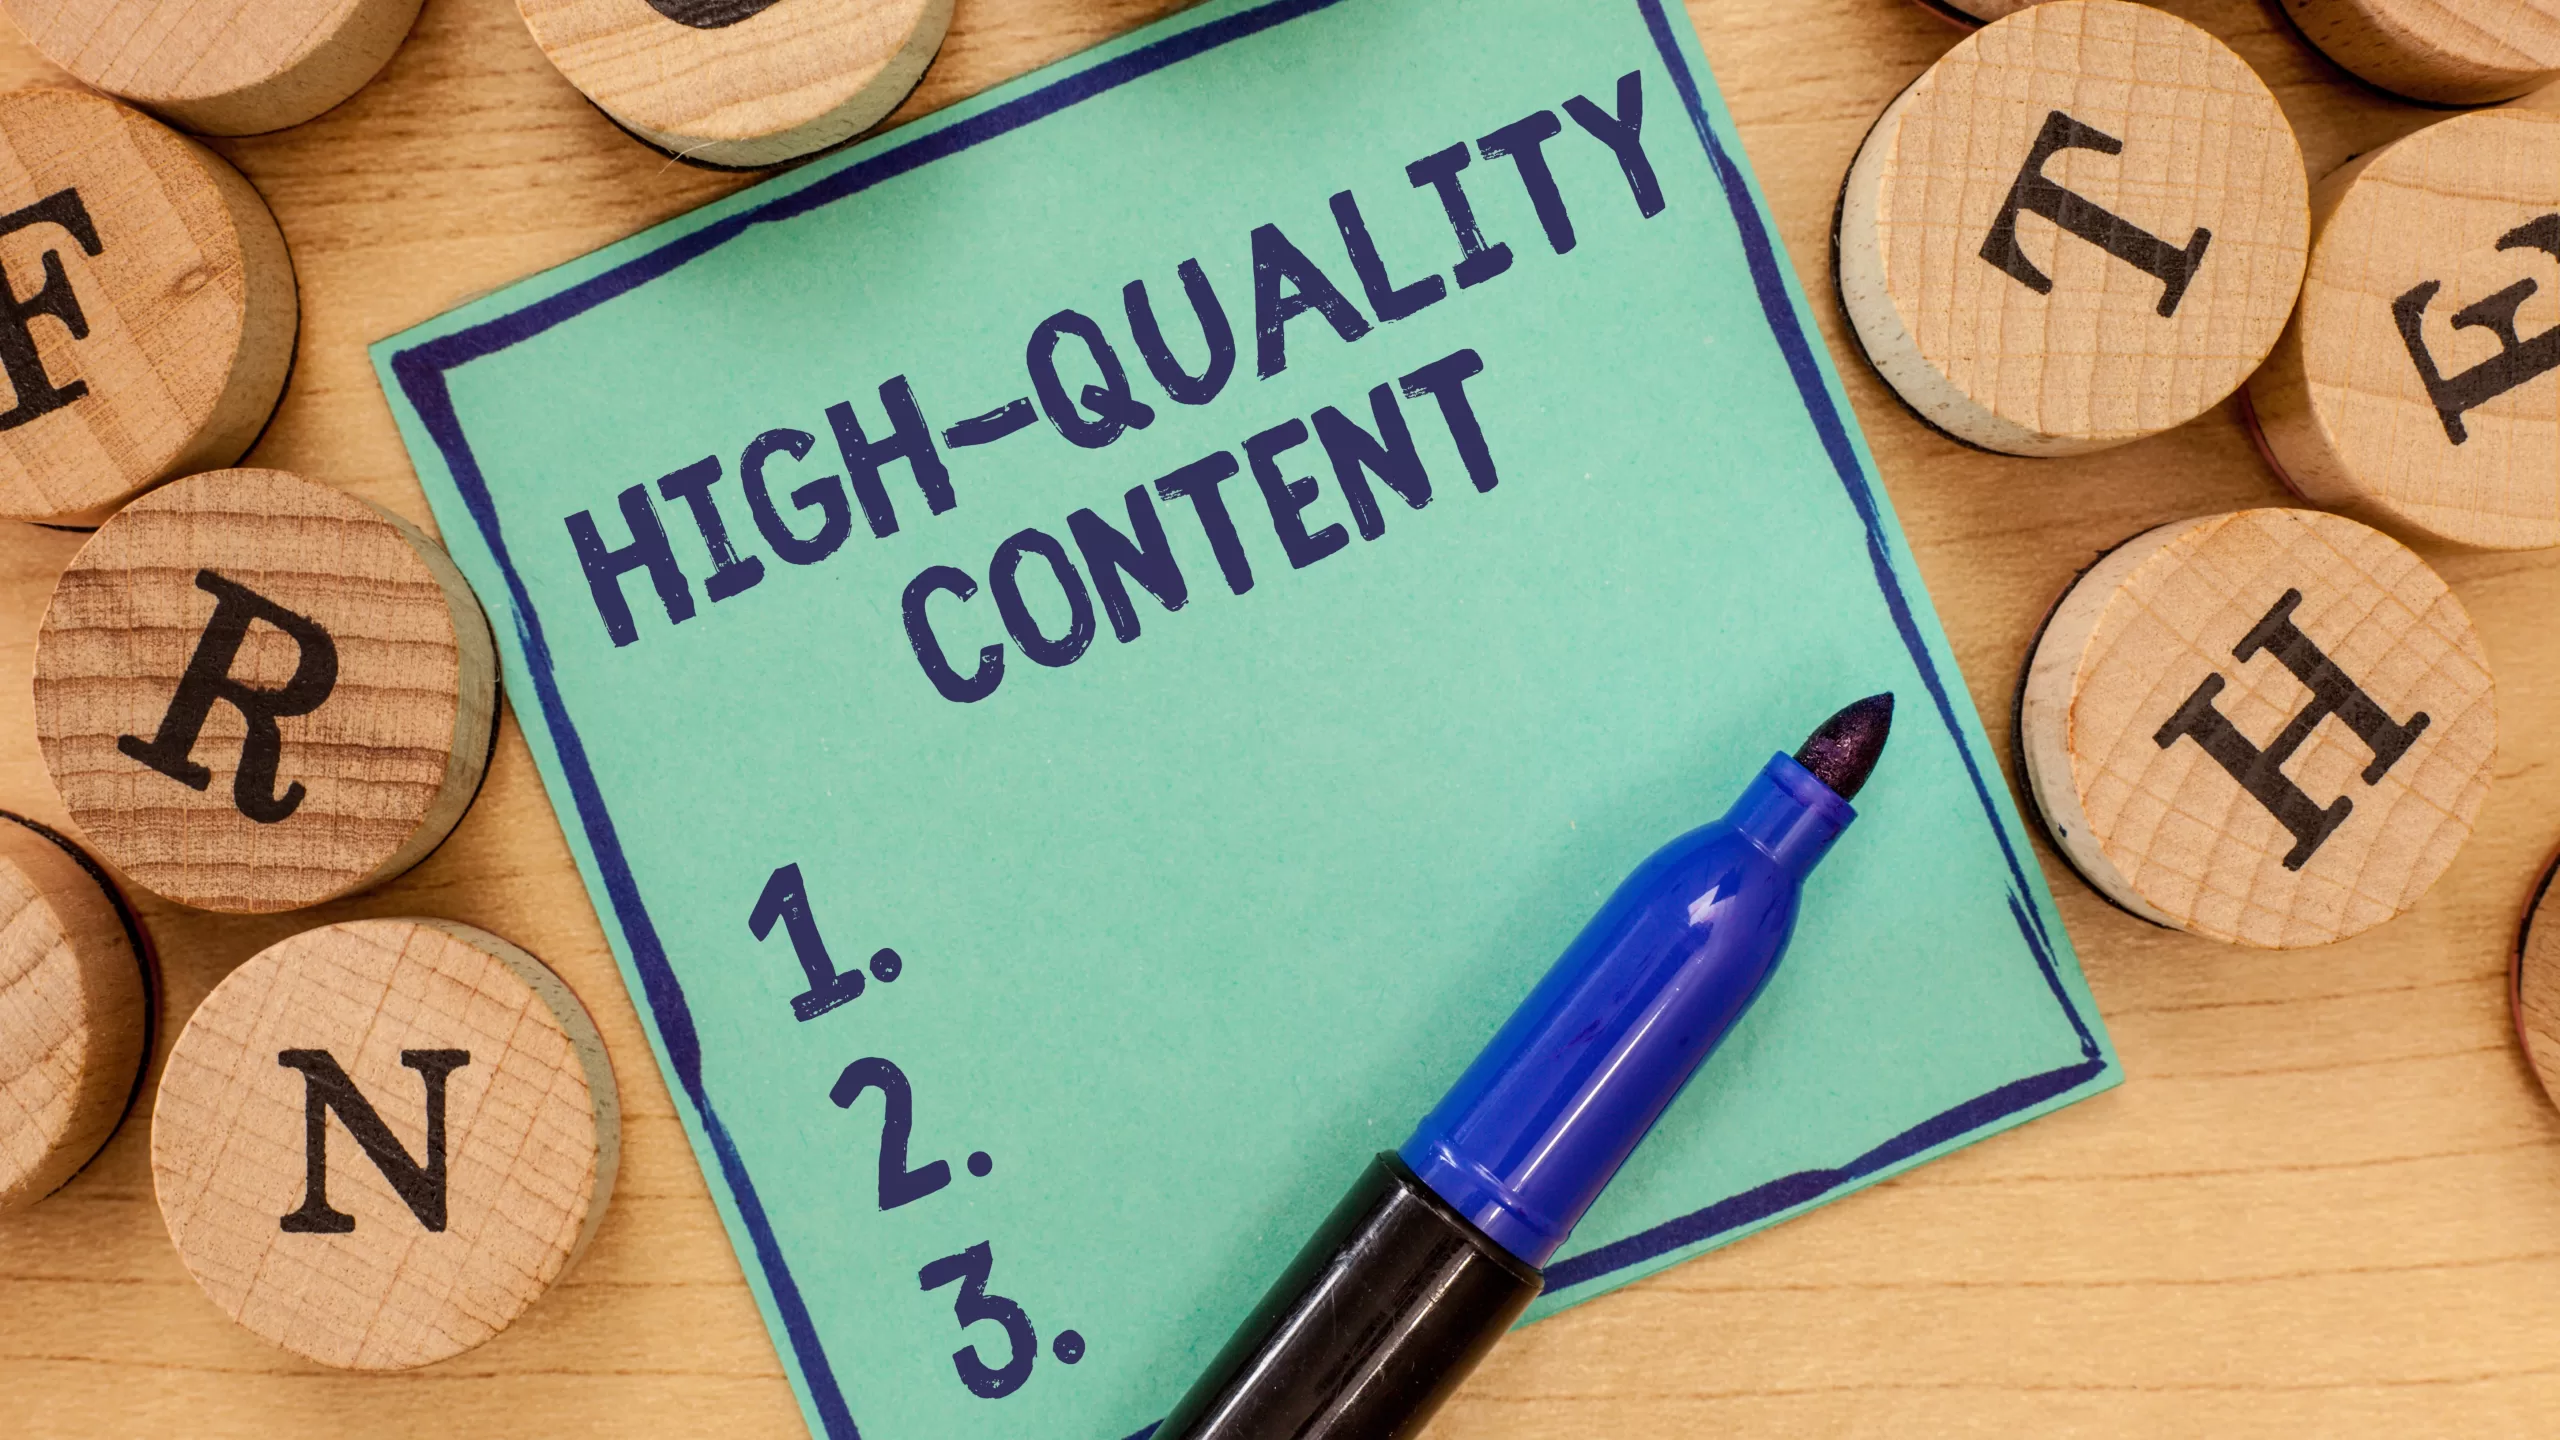 What is high-quality content?